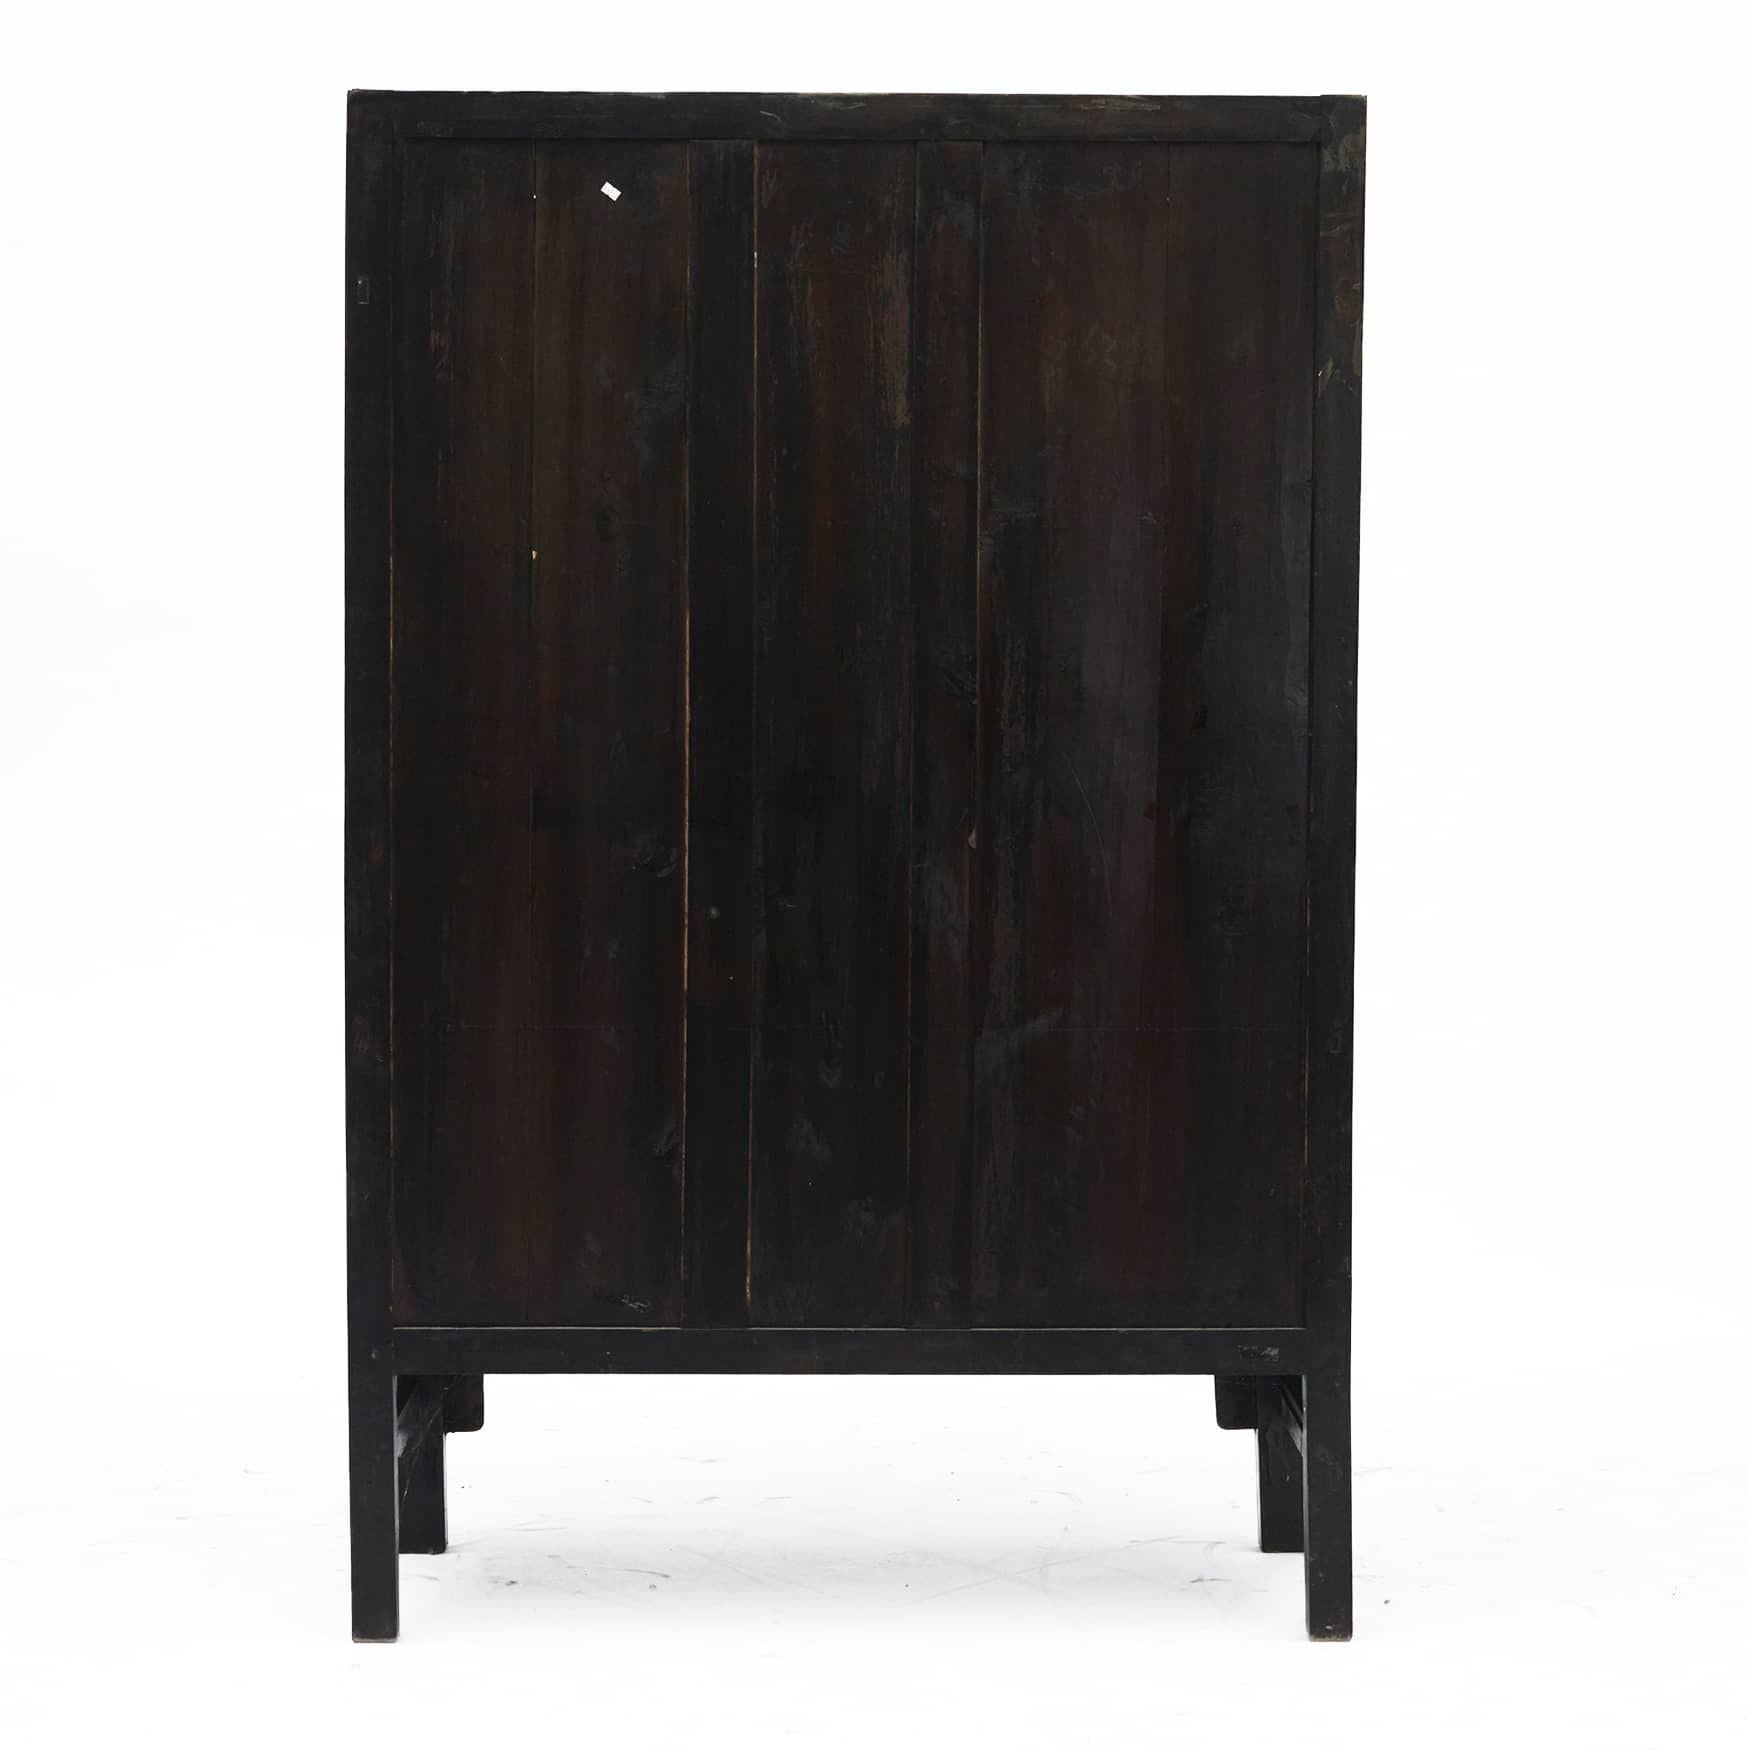 Original Decorated Cabinet, from Fujian Province 1860 - 1880 For Sale 2